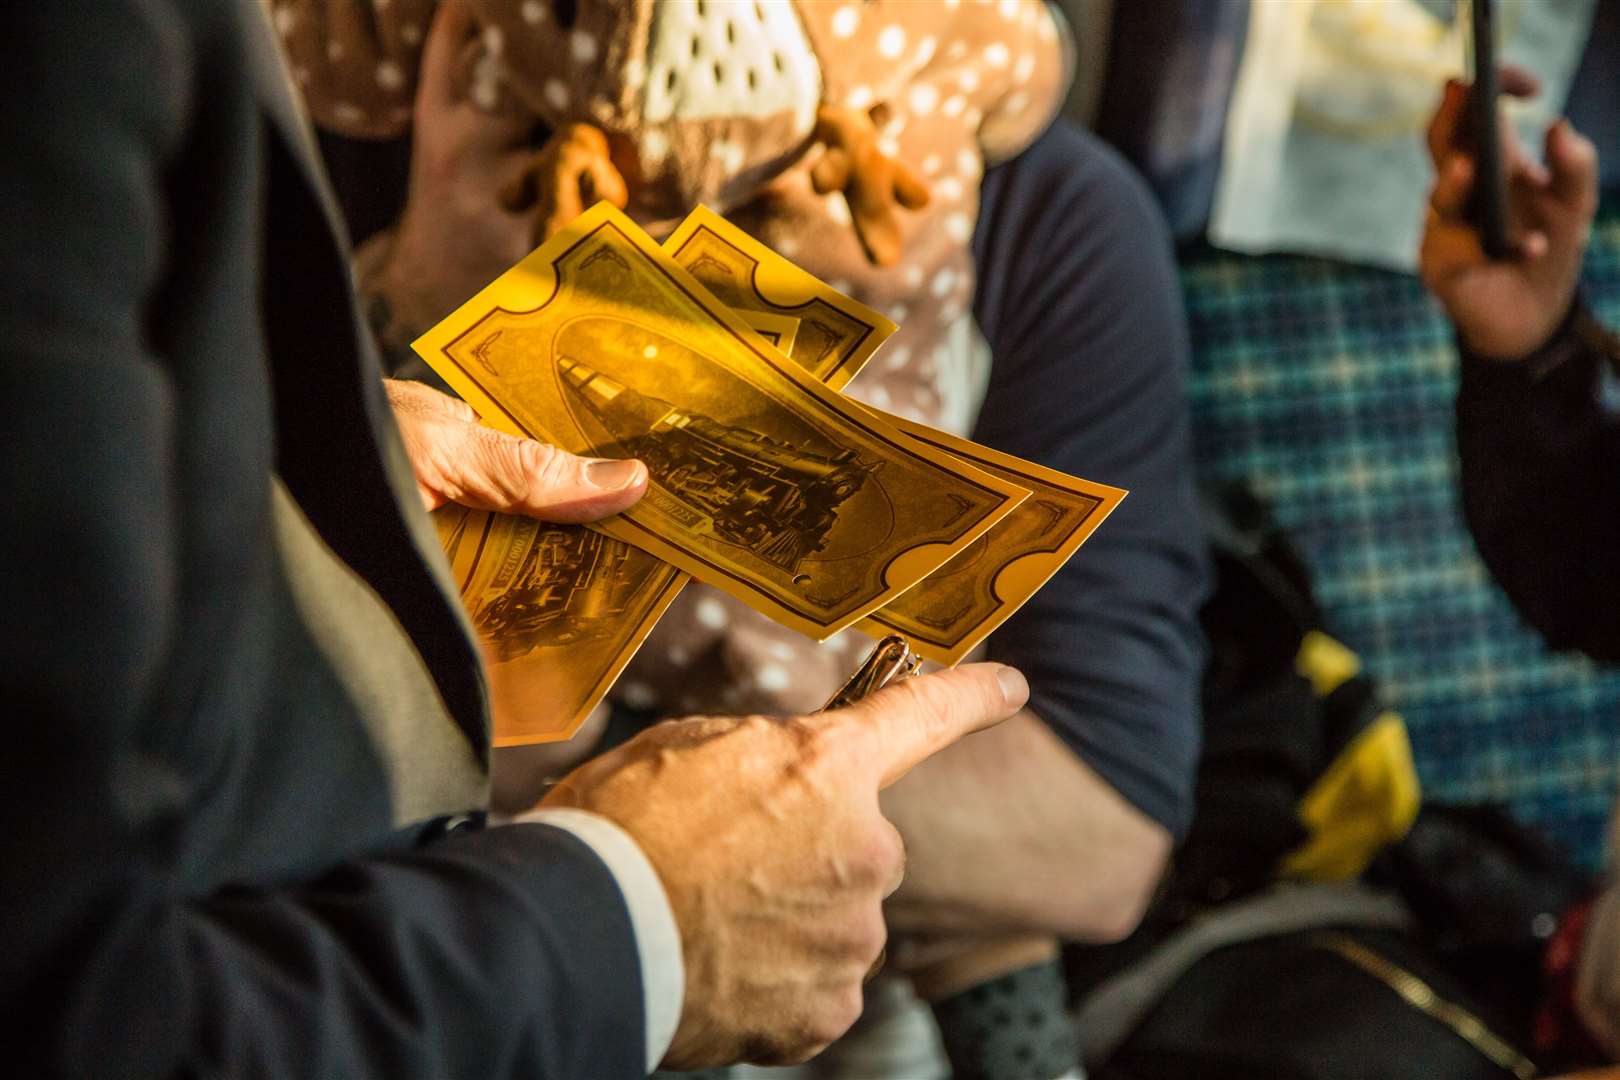 Golden tickets for The Polar Express will go on sale in June